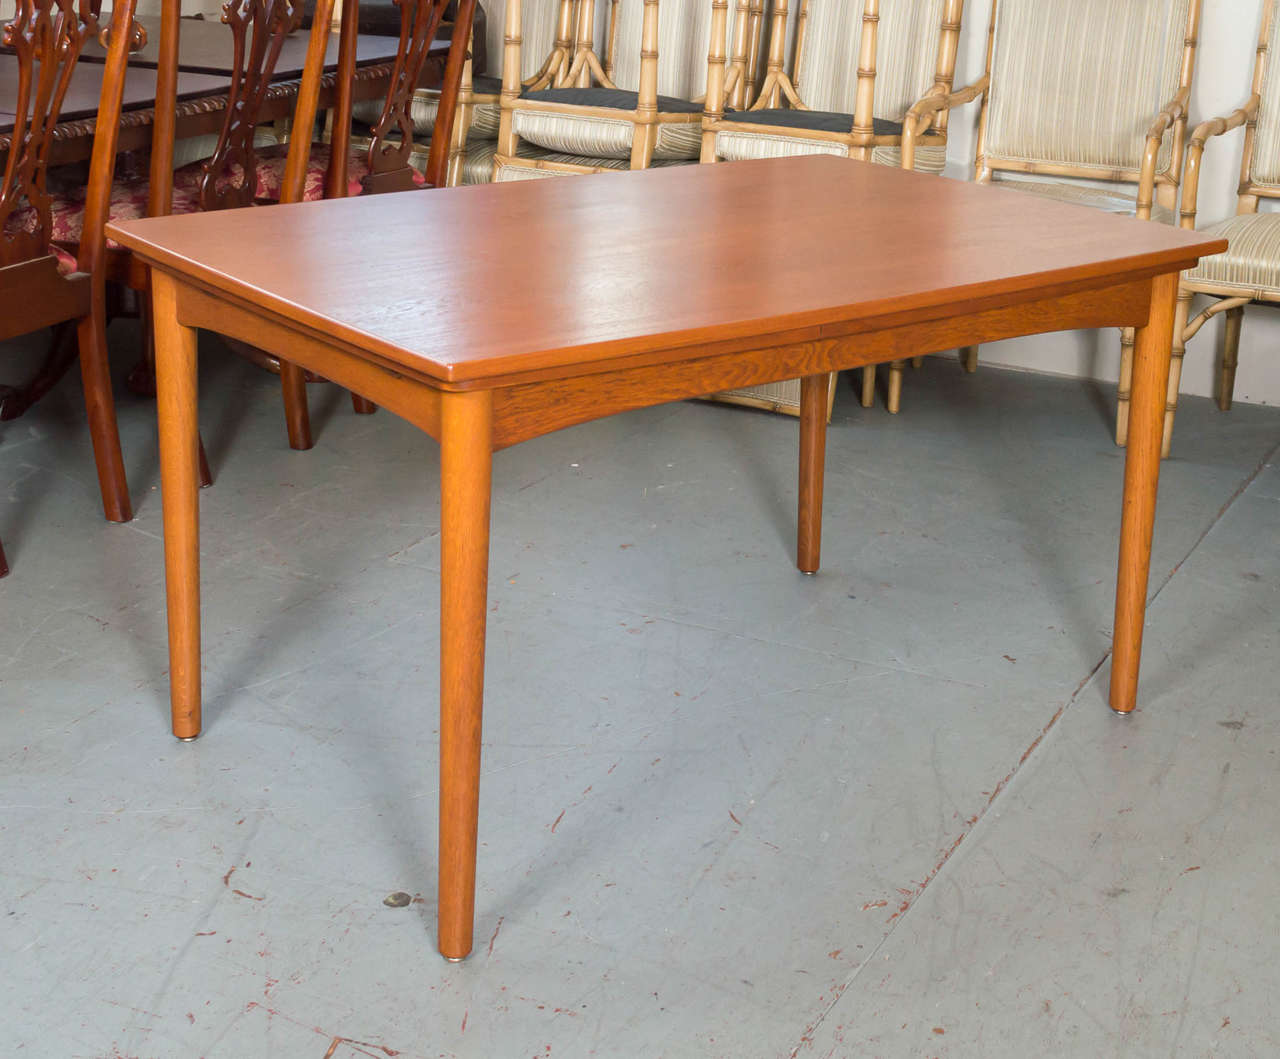 A circa 1950s Danish teak dining table by Arne Hovmand-Olsen for Skovmand & Andersen. It can accommodate small to large groups with it's extendable leaves.
Leaves are 19.50 wide.